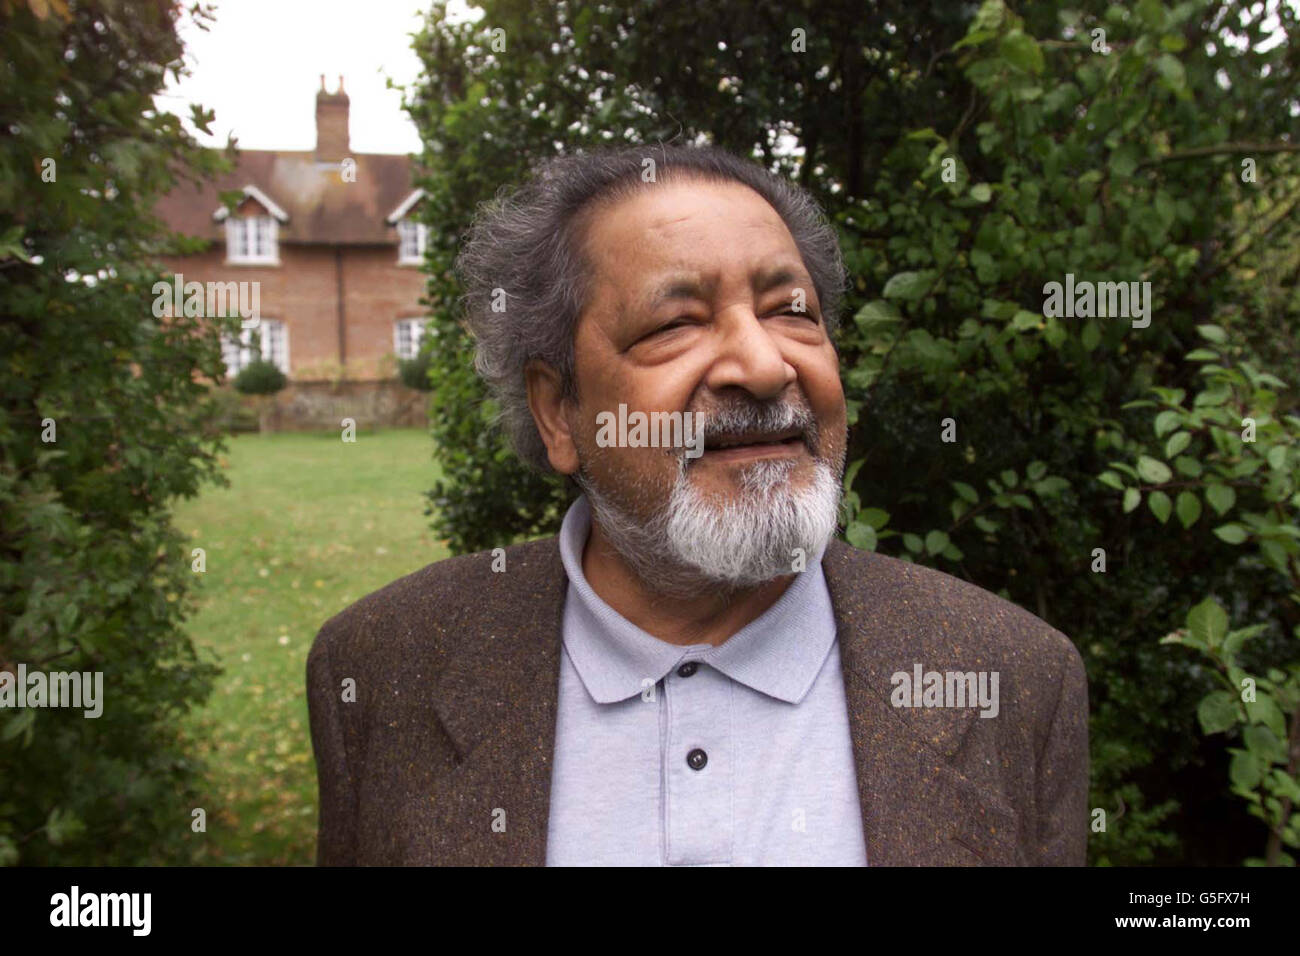 British author V.S. Naipaul at his home near Salisbury, Wiltshire after it was announced that he has been awarded the Nobel Prize for Literature. * ..... The 69-year-old, Trinidad-born writer landed the award for "having united perceptive narrative and incorruptible scrutiny in works that compel us to see the presence of suppressed histories", according to the prize academy. Stock Photo